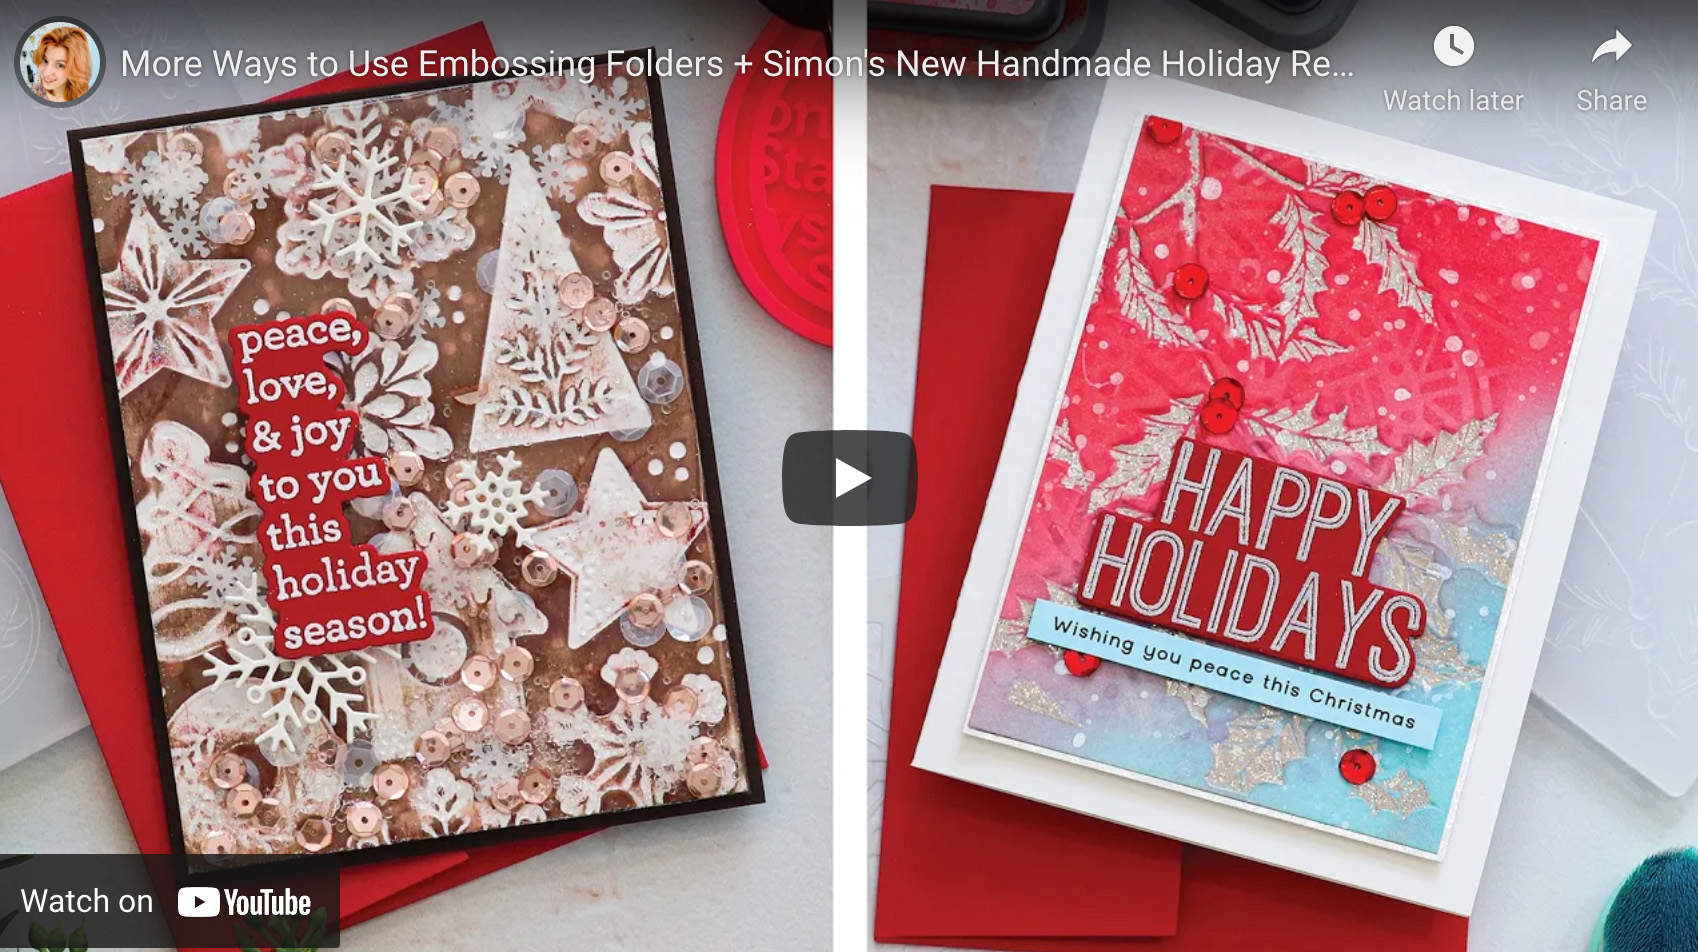 Double Embossing: Another Way to Use Embossing Folders! - Nina